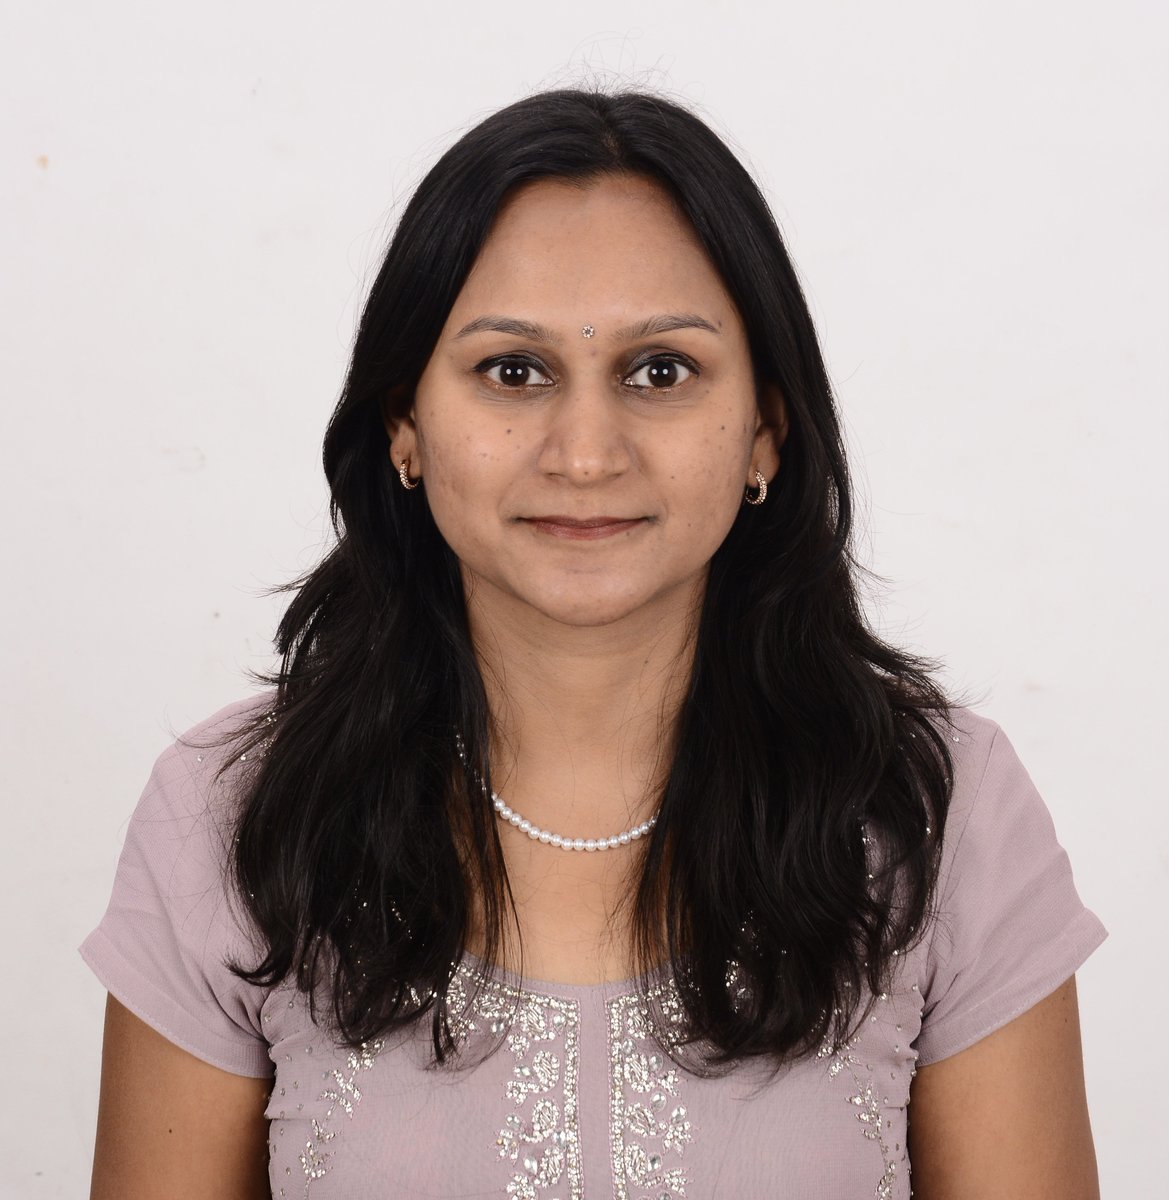 1) Welcome to a 🆕 #accredited #tweetorial brought to you by the collaboration of @ISNkidneycare and @ckd_ce. Our expert author is Mythri Shankar @nephromythri, Asst Prof, Nephrology, Institute of Nephrourology, and our topic for 🆓#CME is #ADPKD. #MedTwitter #nephtwitter